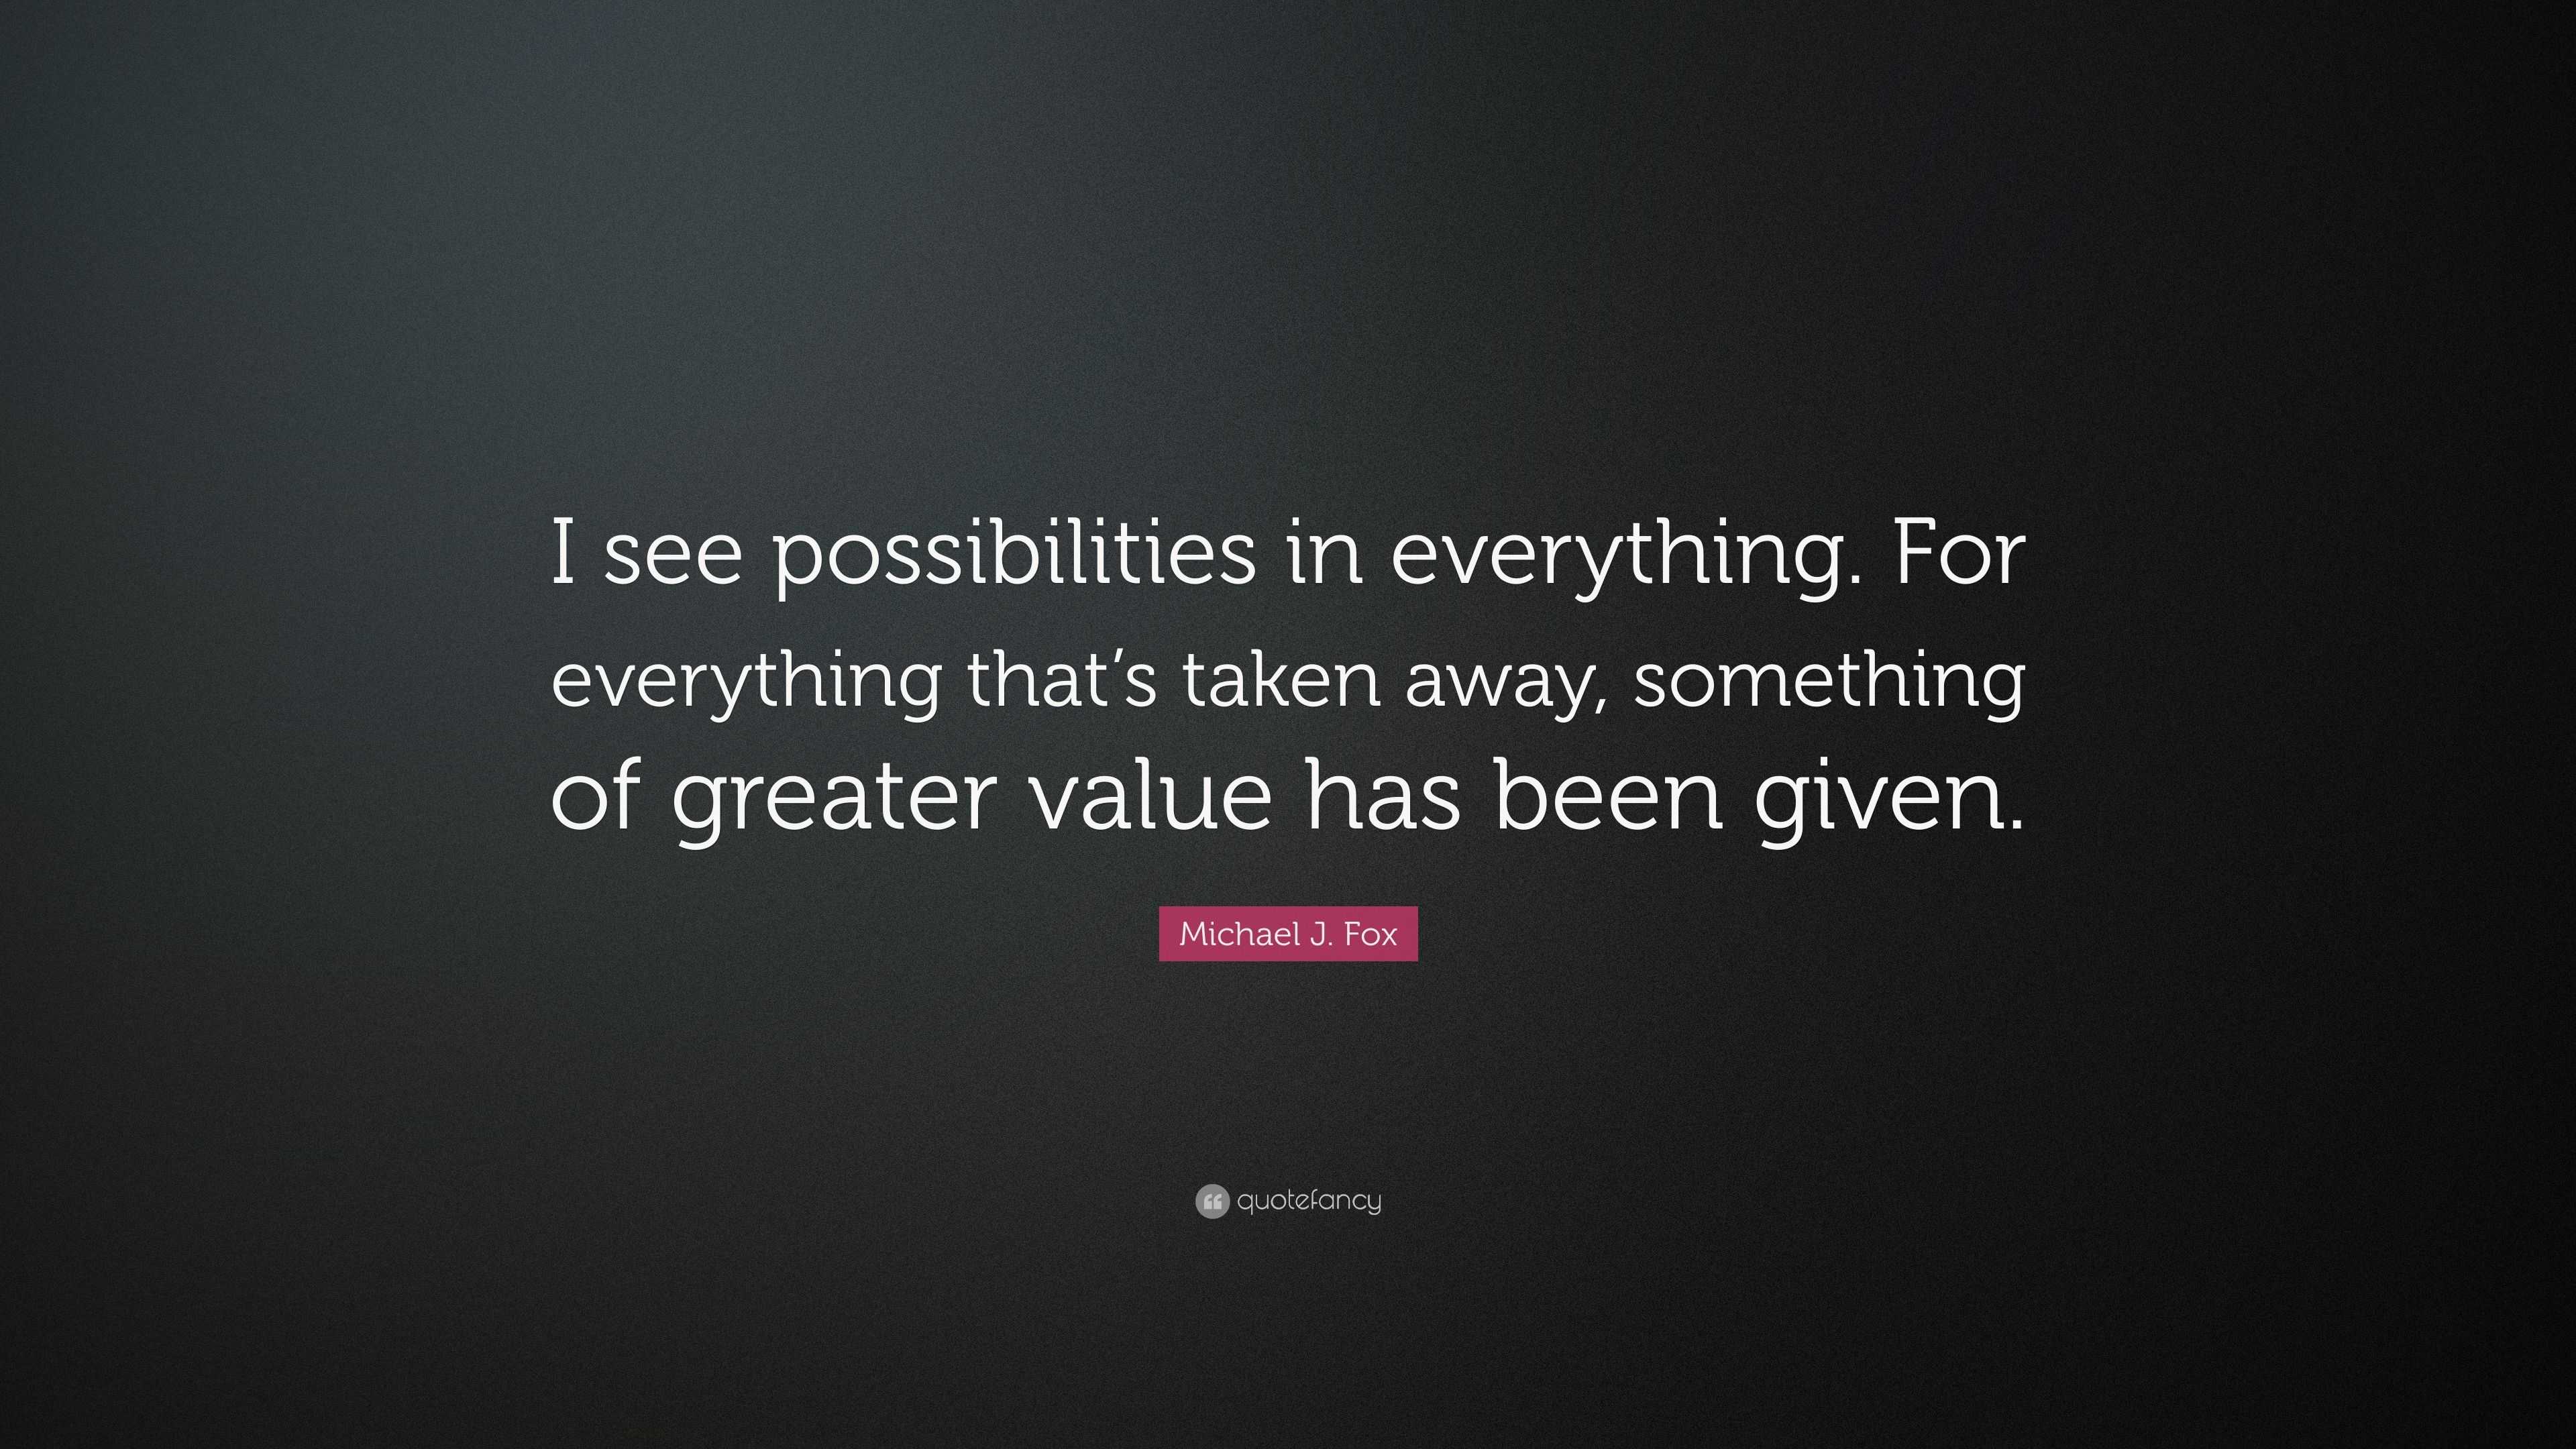 Michael J. Fox Quote: “I see possibilities in everything. For ...